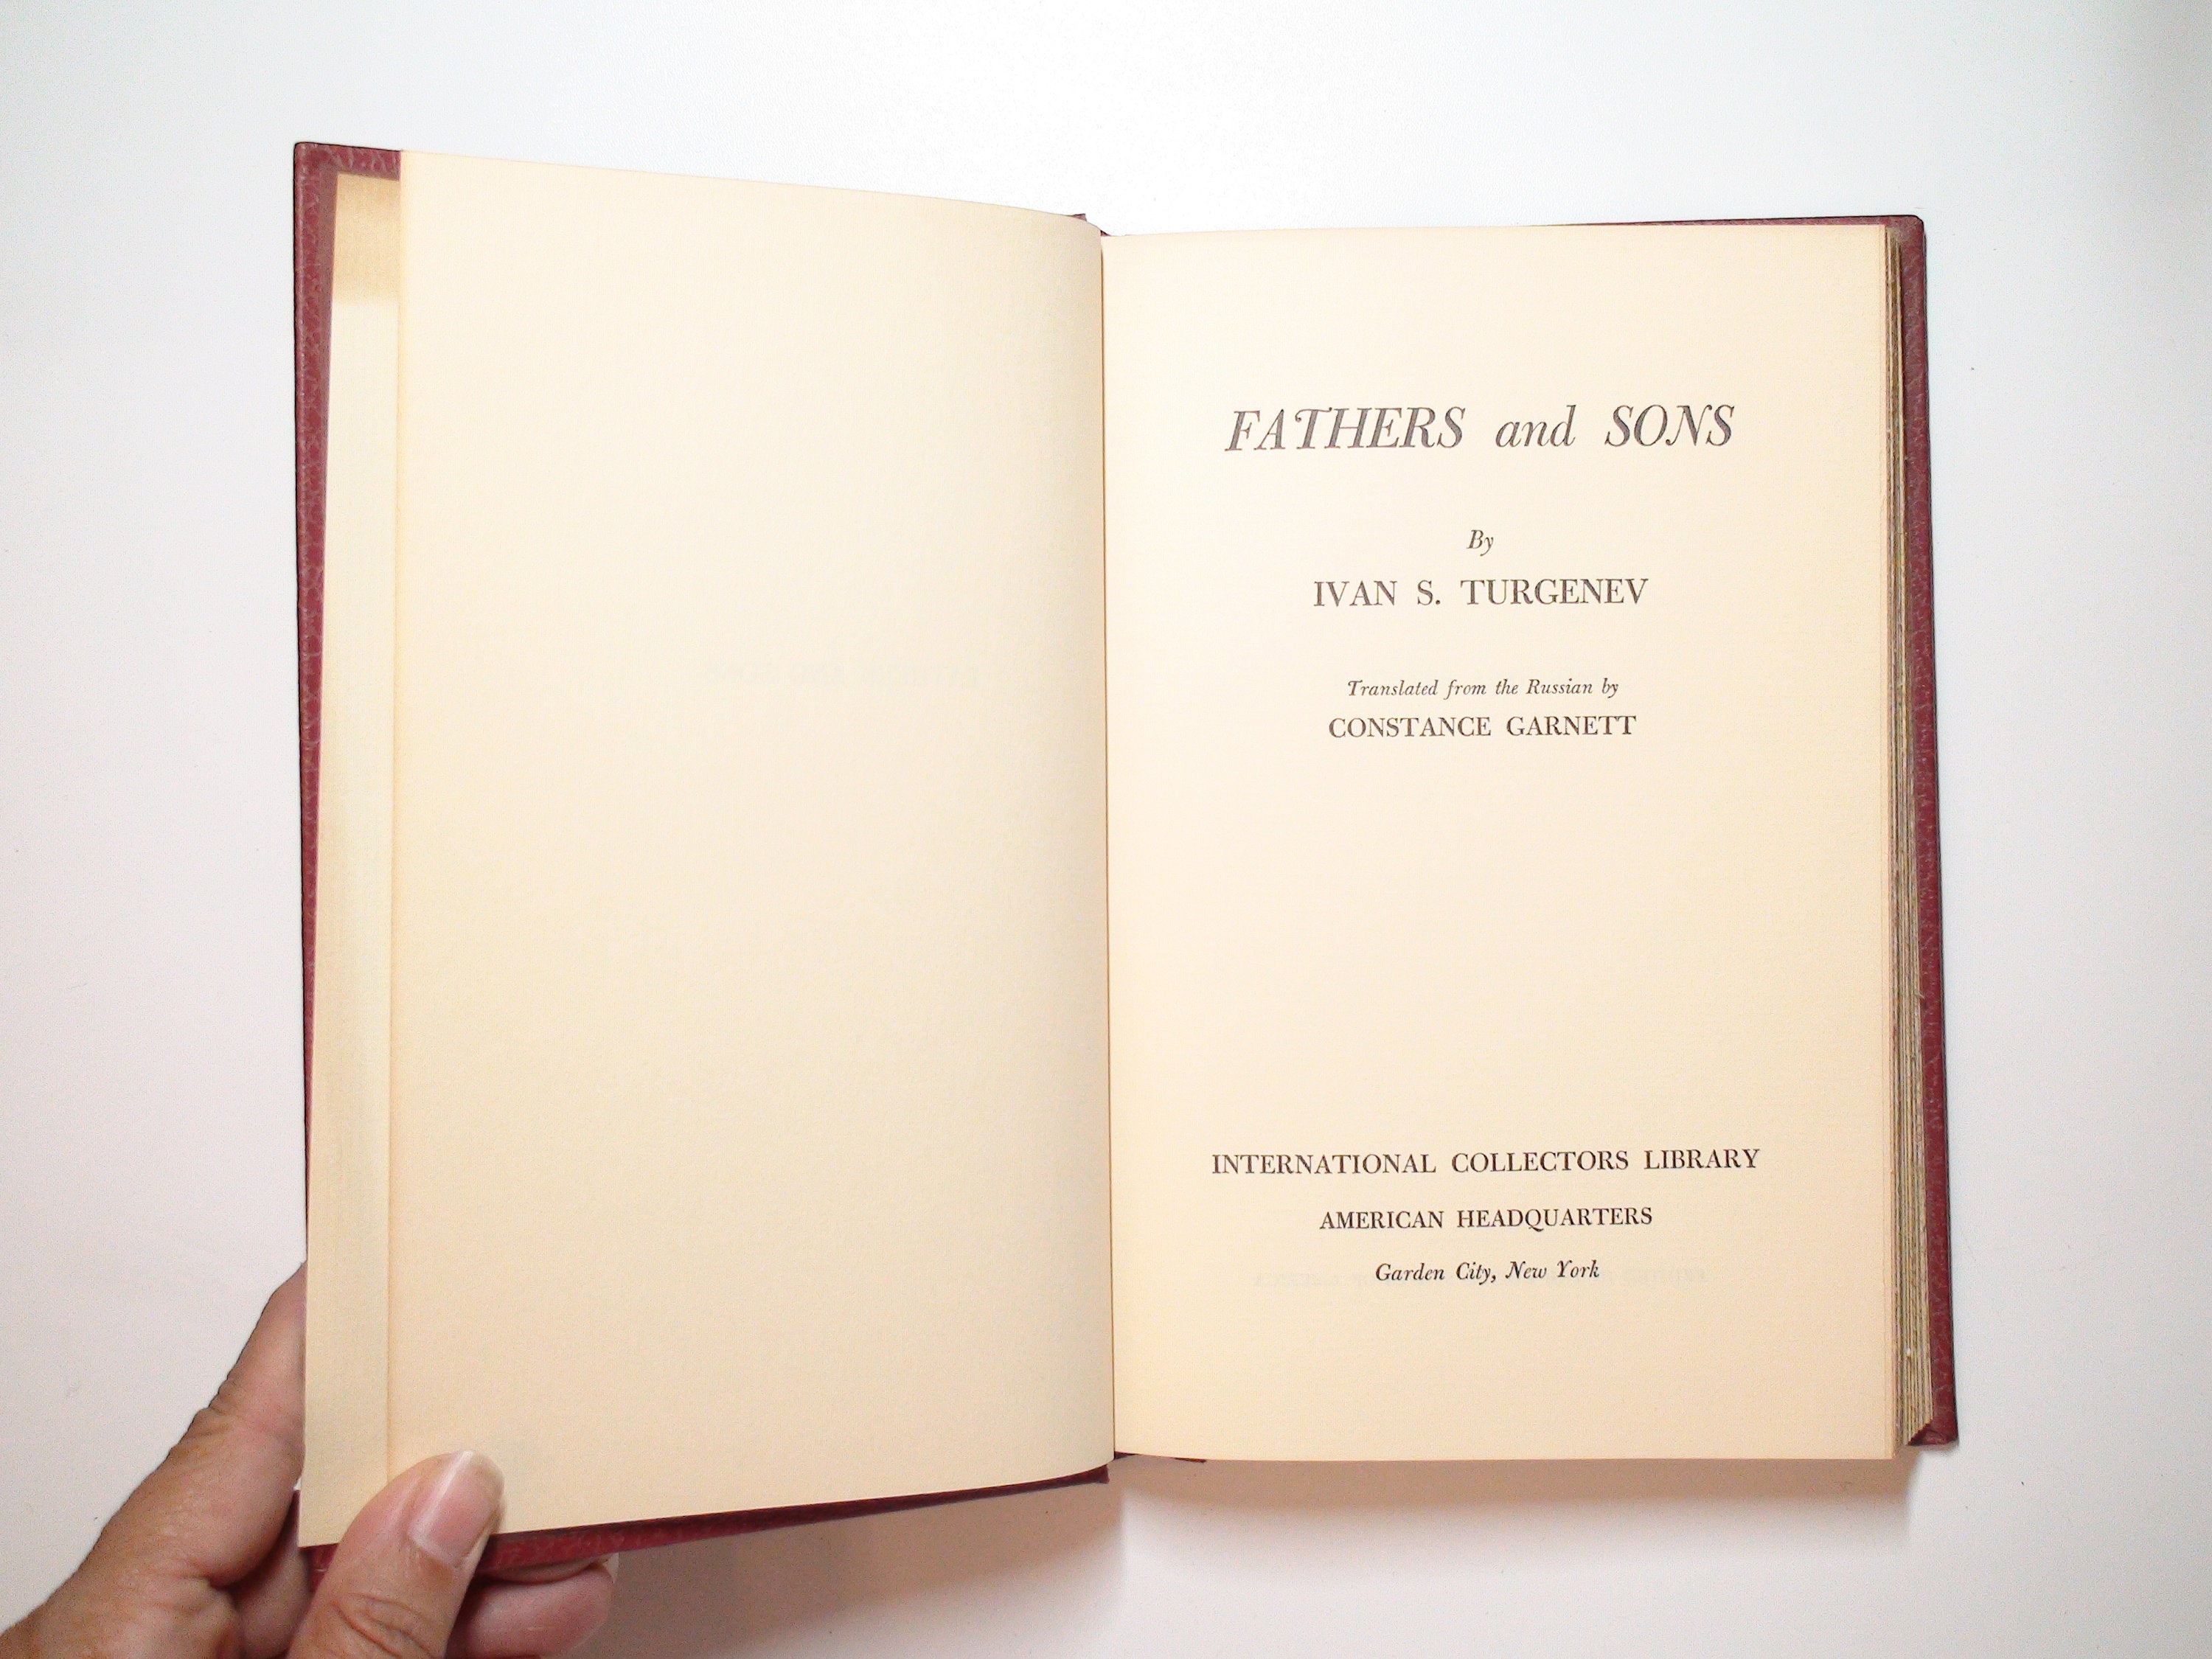 Fathers and Sons, by Ivan S. Turgenev, International Collectors Library, Leather